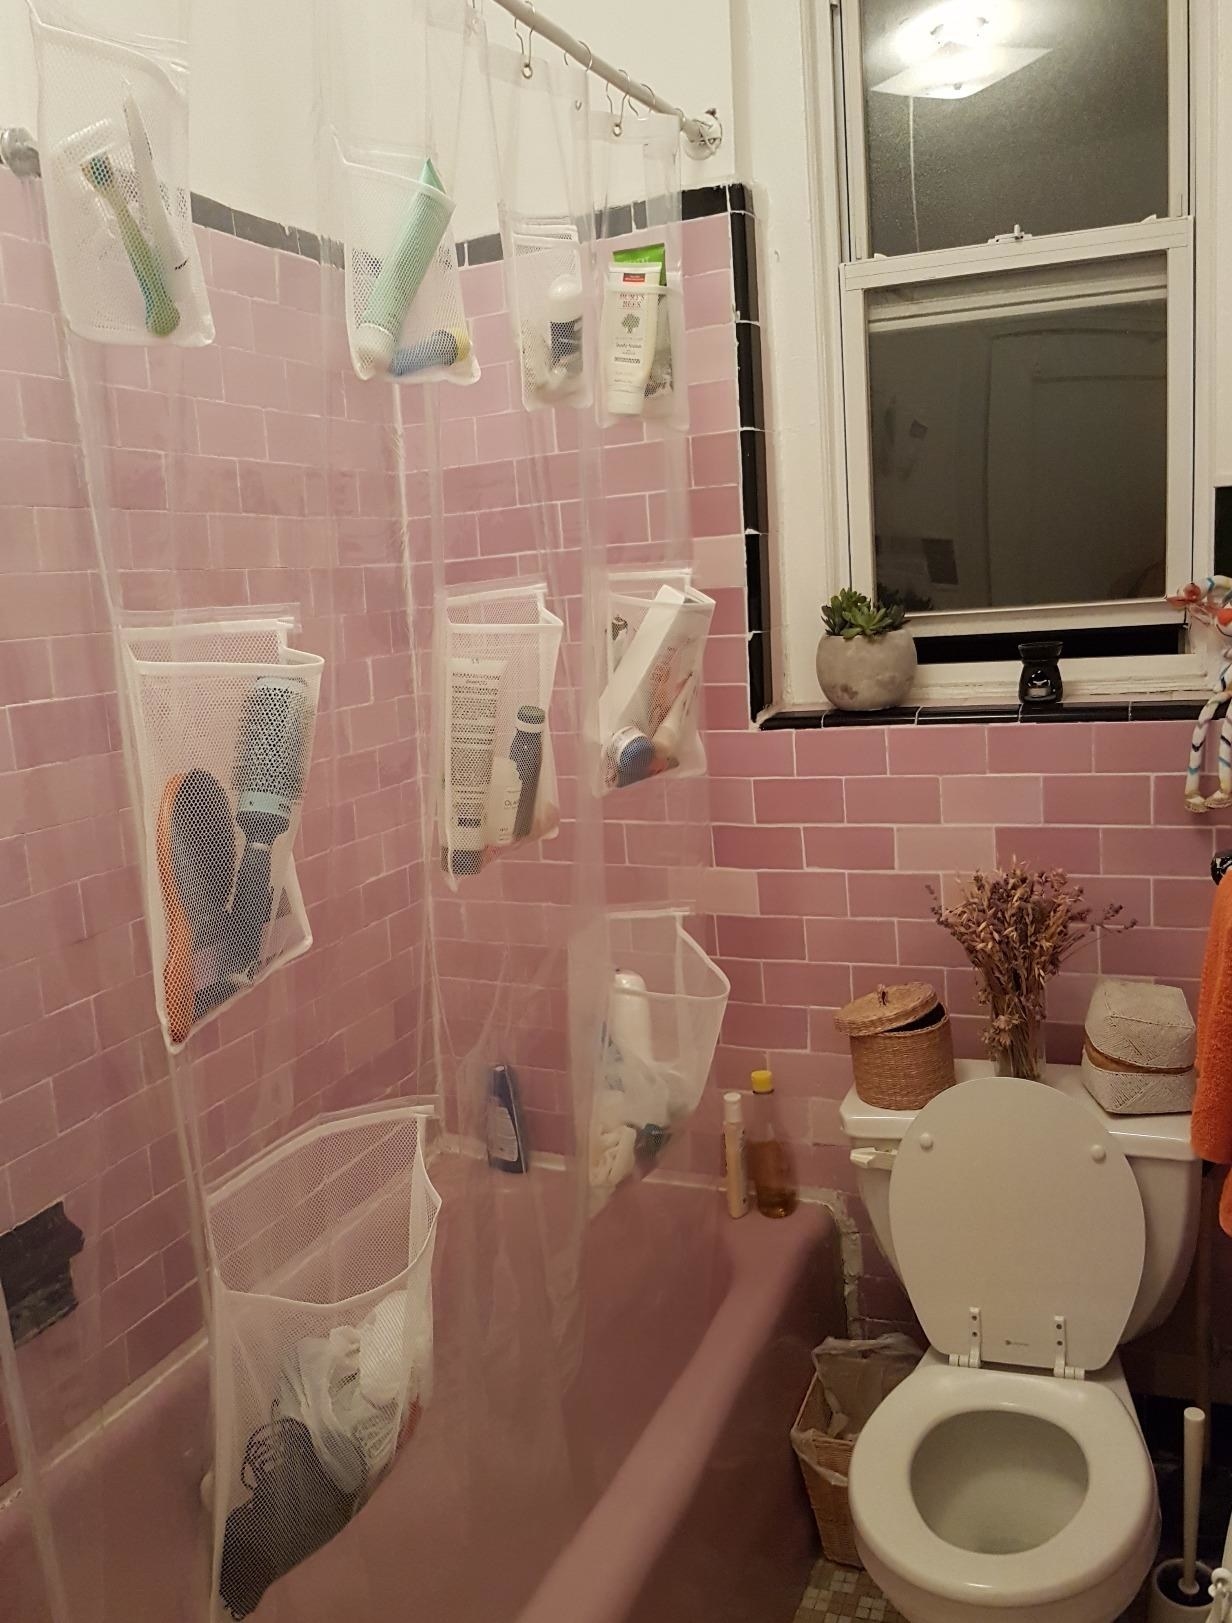 Reviewer image of the shower curtain with a variety of shampoos, hair brushes, and other bathroom items stored in the pockets